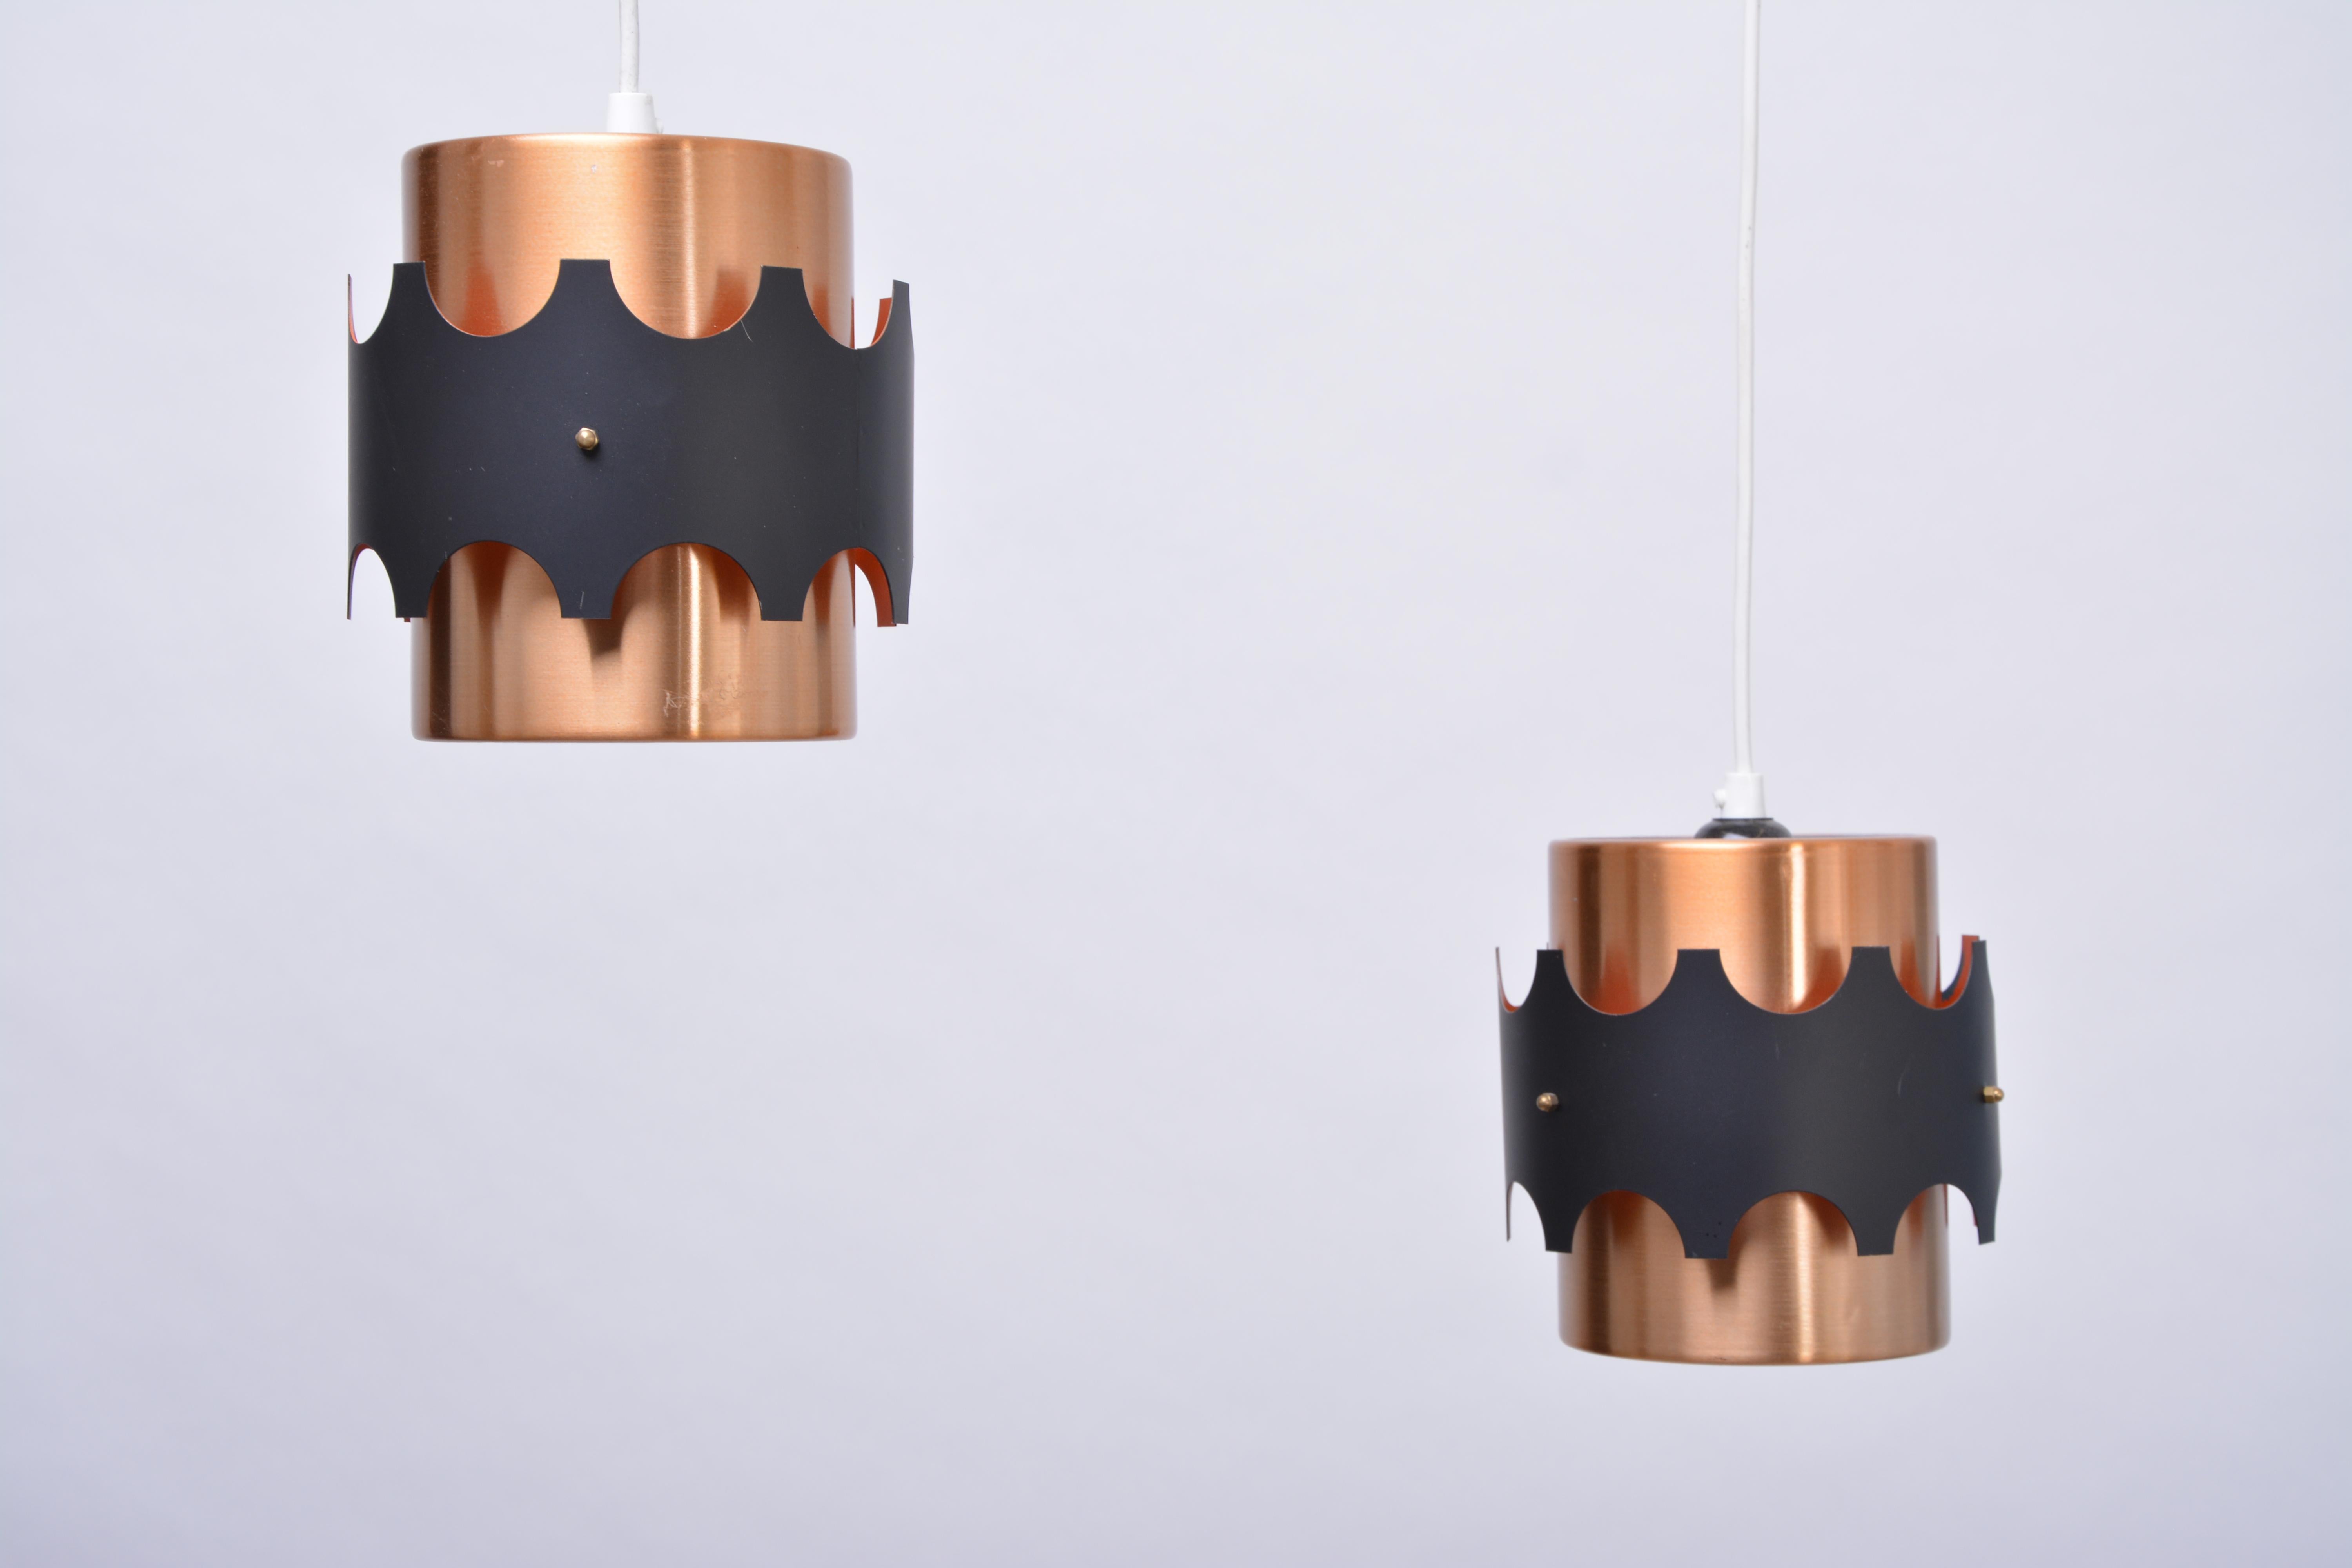 Pair of pendant lamps made of anodized aluminium made in East Germany in the 1960s. The design is similar to Jo Hammerborg.